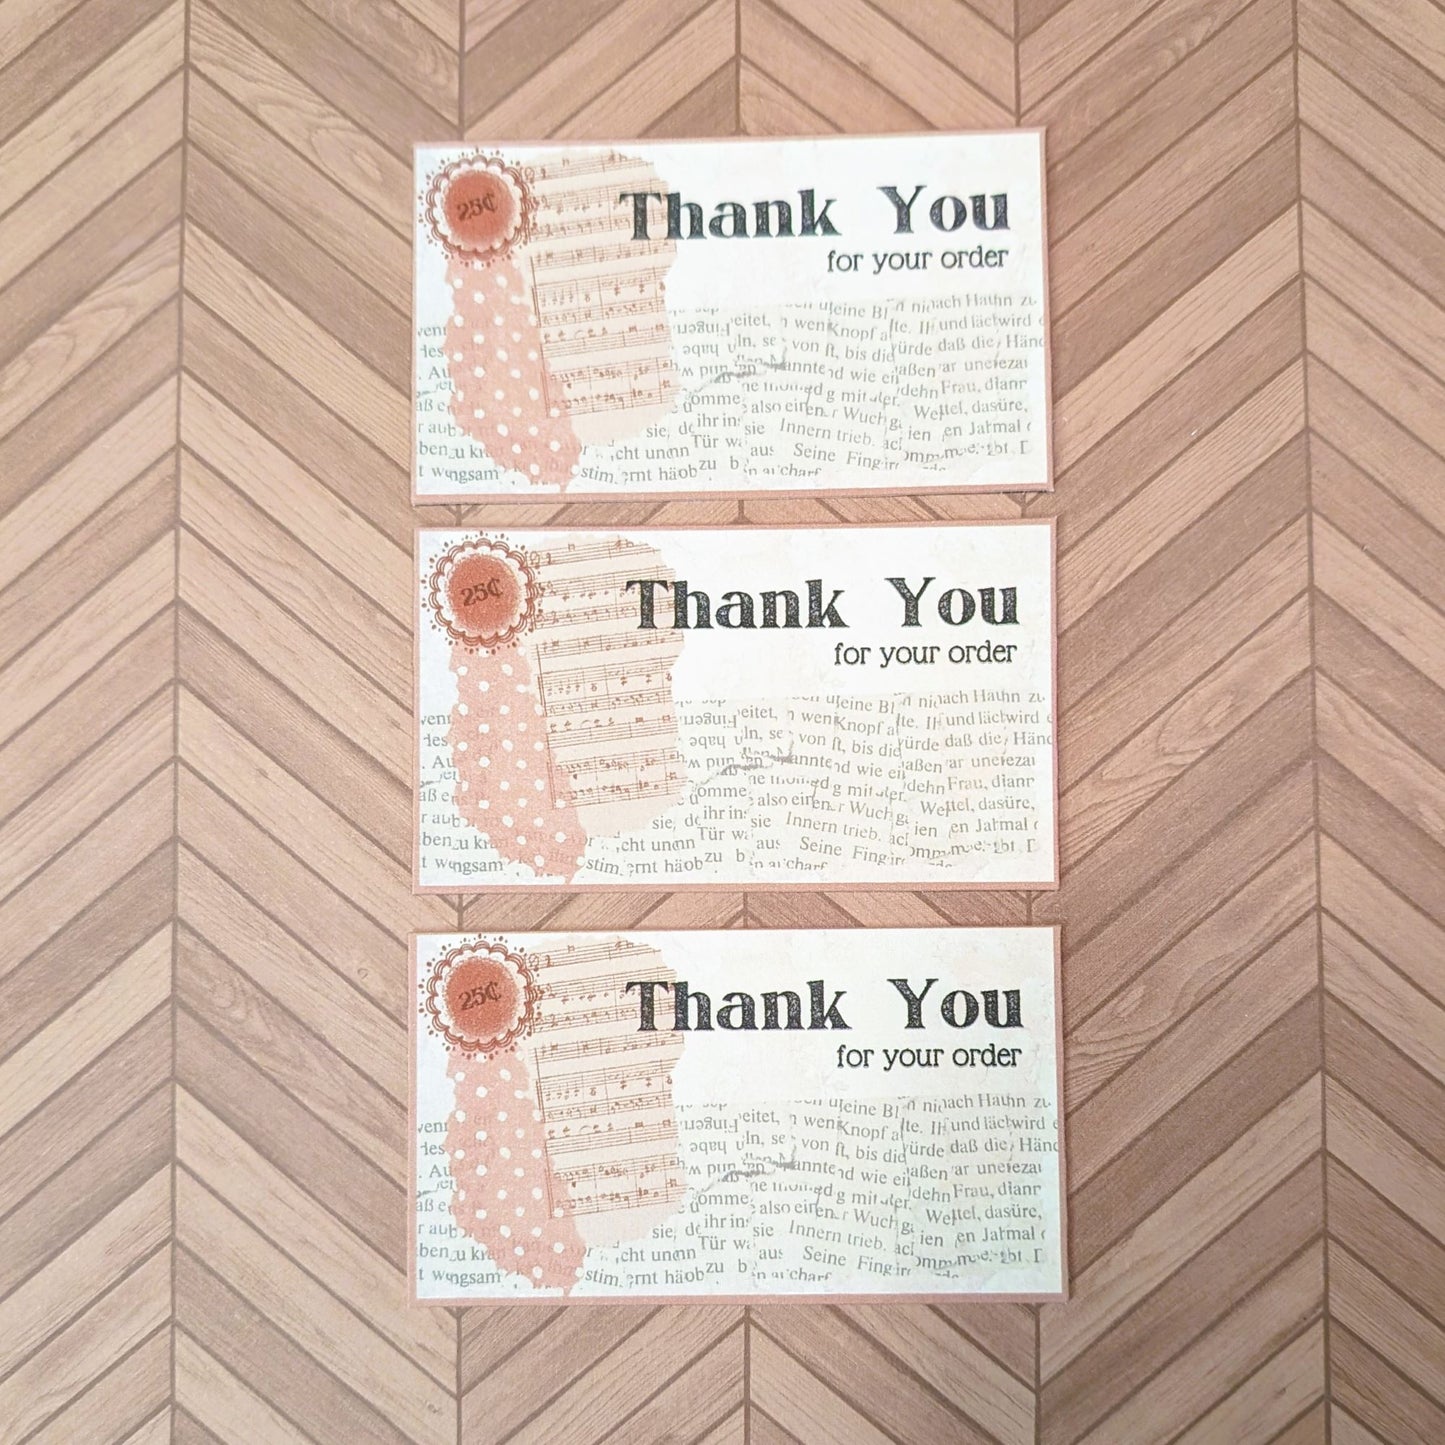 Thank You Cards, 24ct - Perfect for Small Businesses - Business Card Size